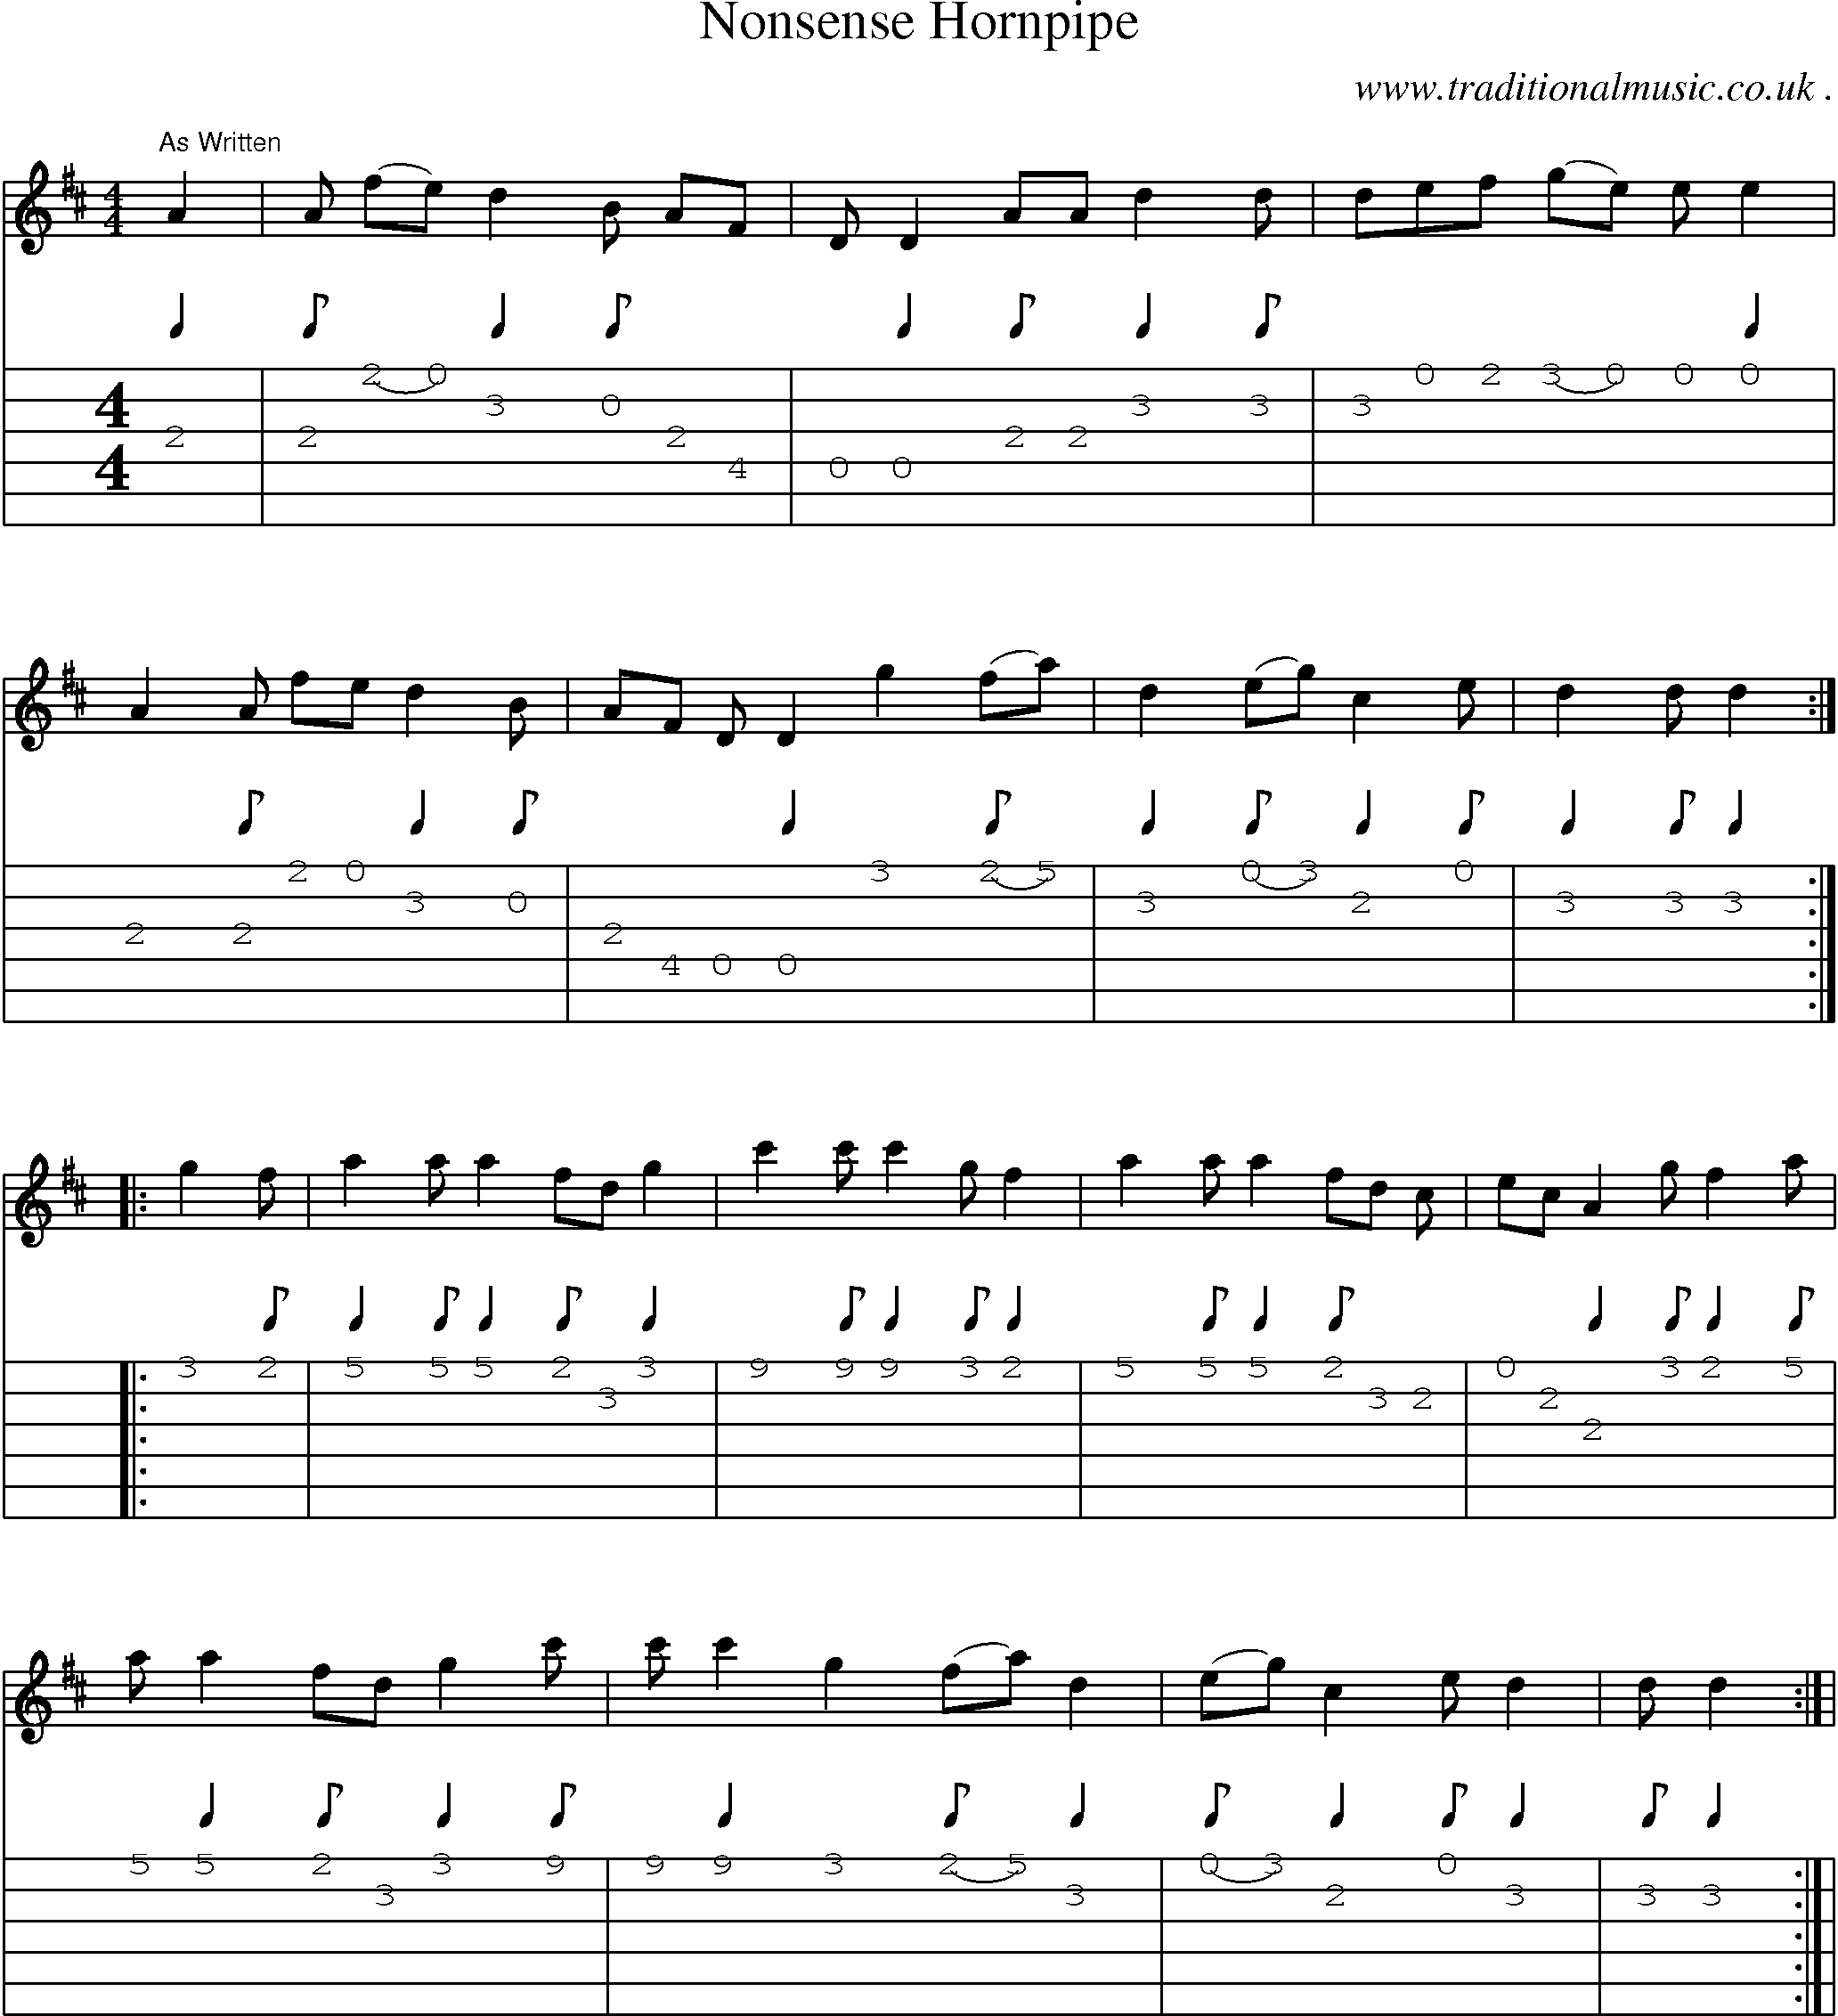 Sheet-Music and Guitar Tabs for Nonsense Hornpipe